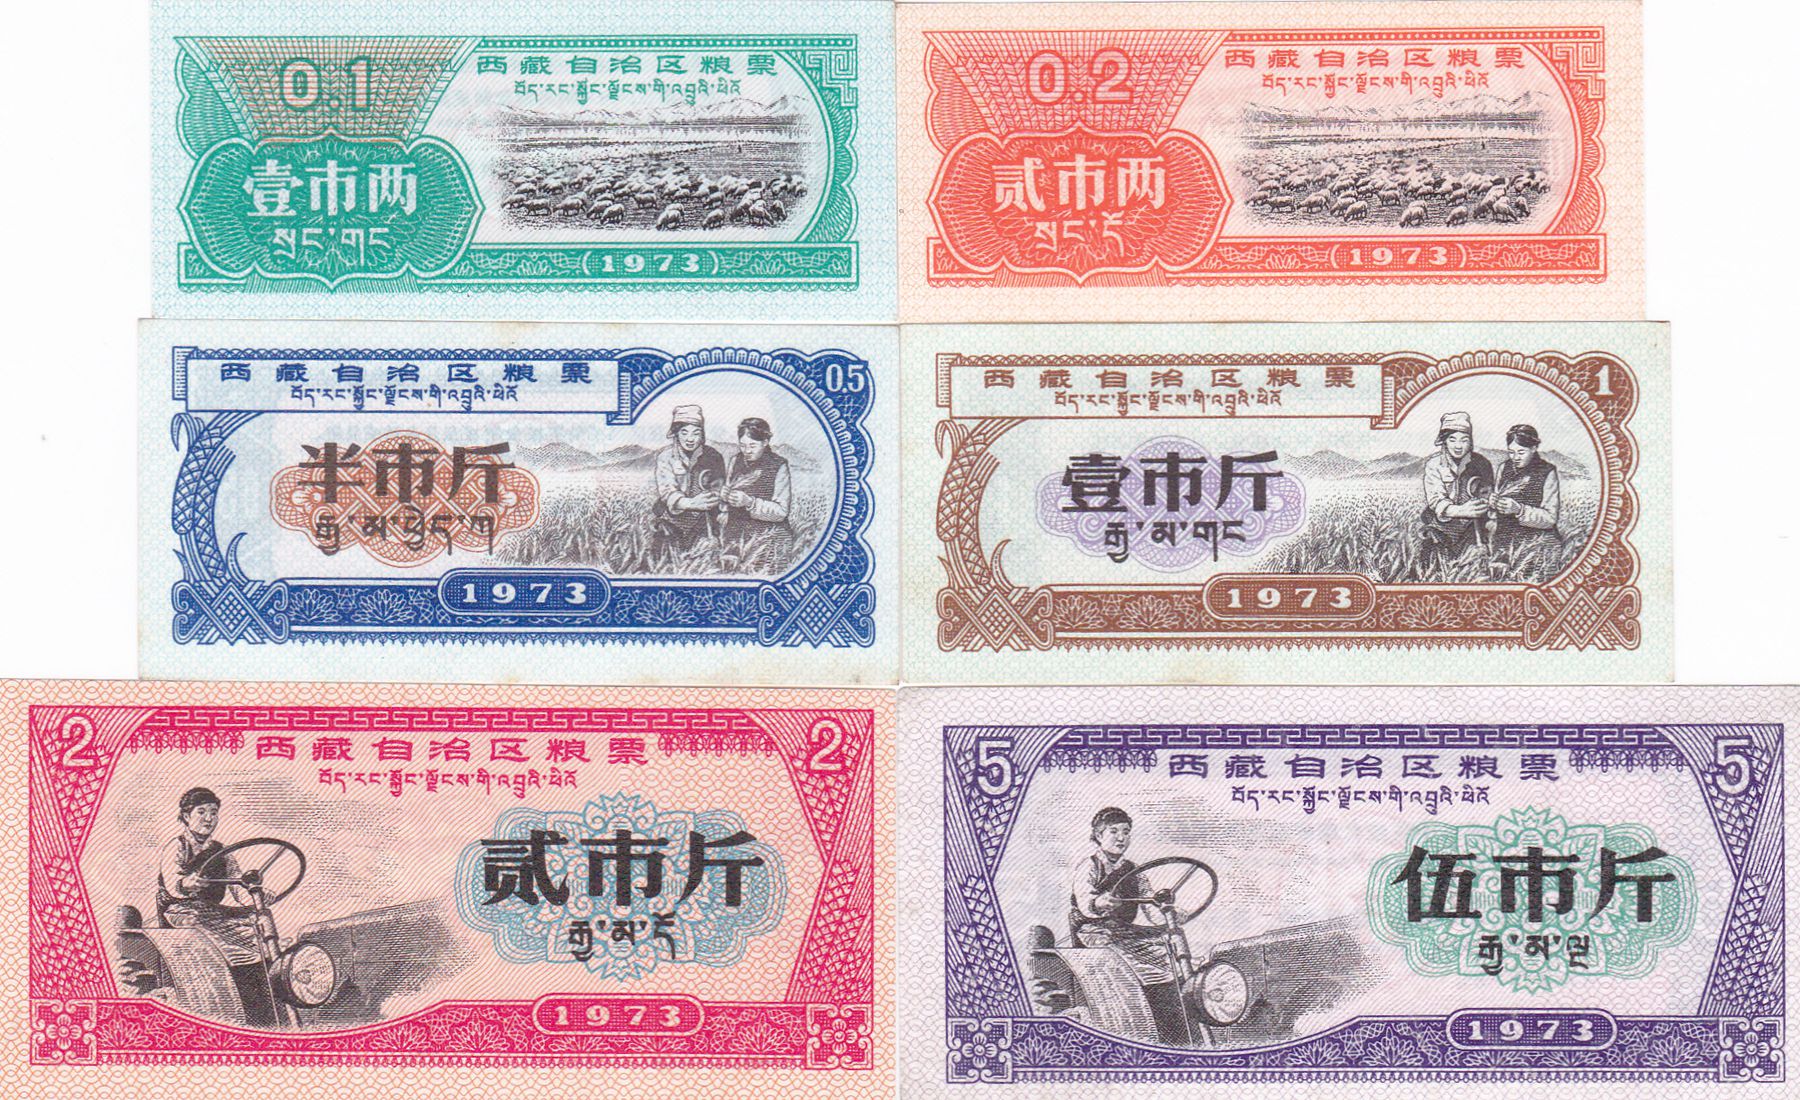 H7025, Tibet Food Ration Coupons, 6 Pcs, 1973 Issue Scarce